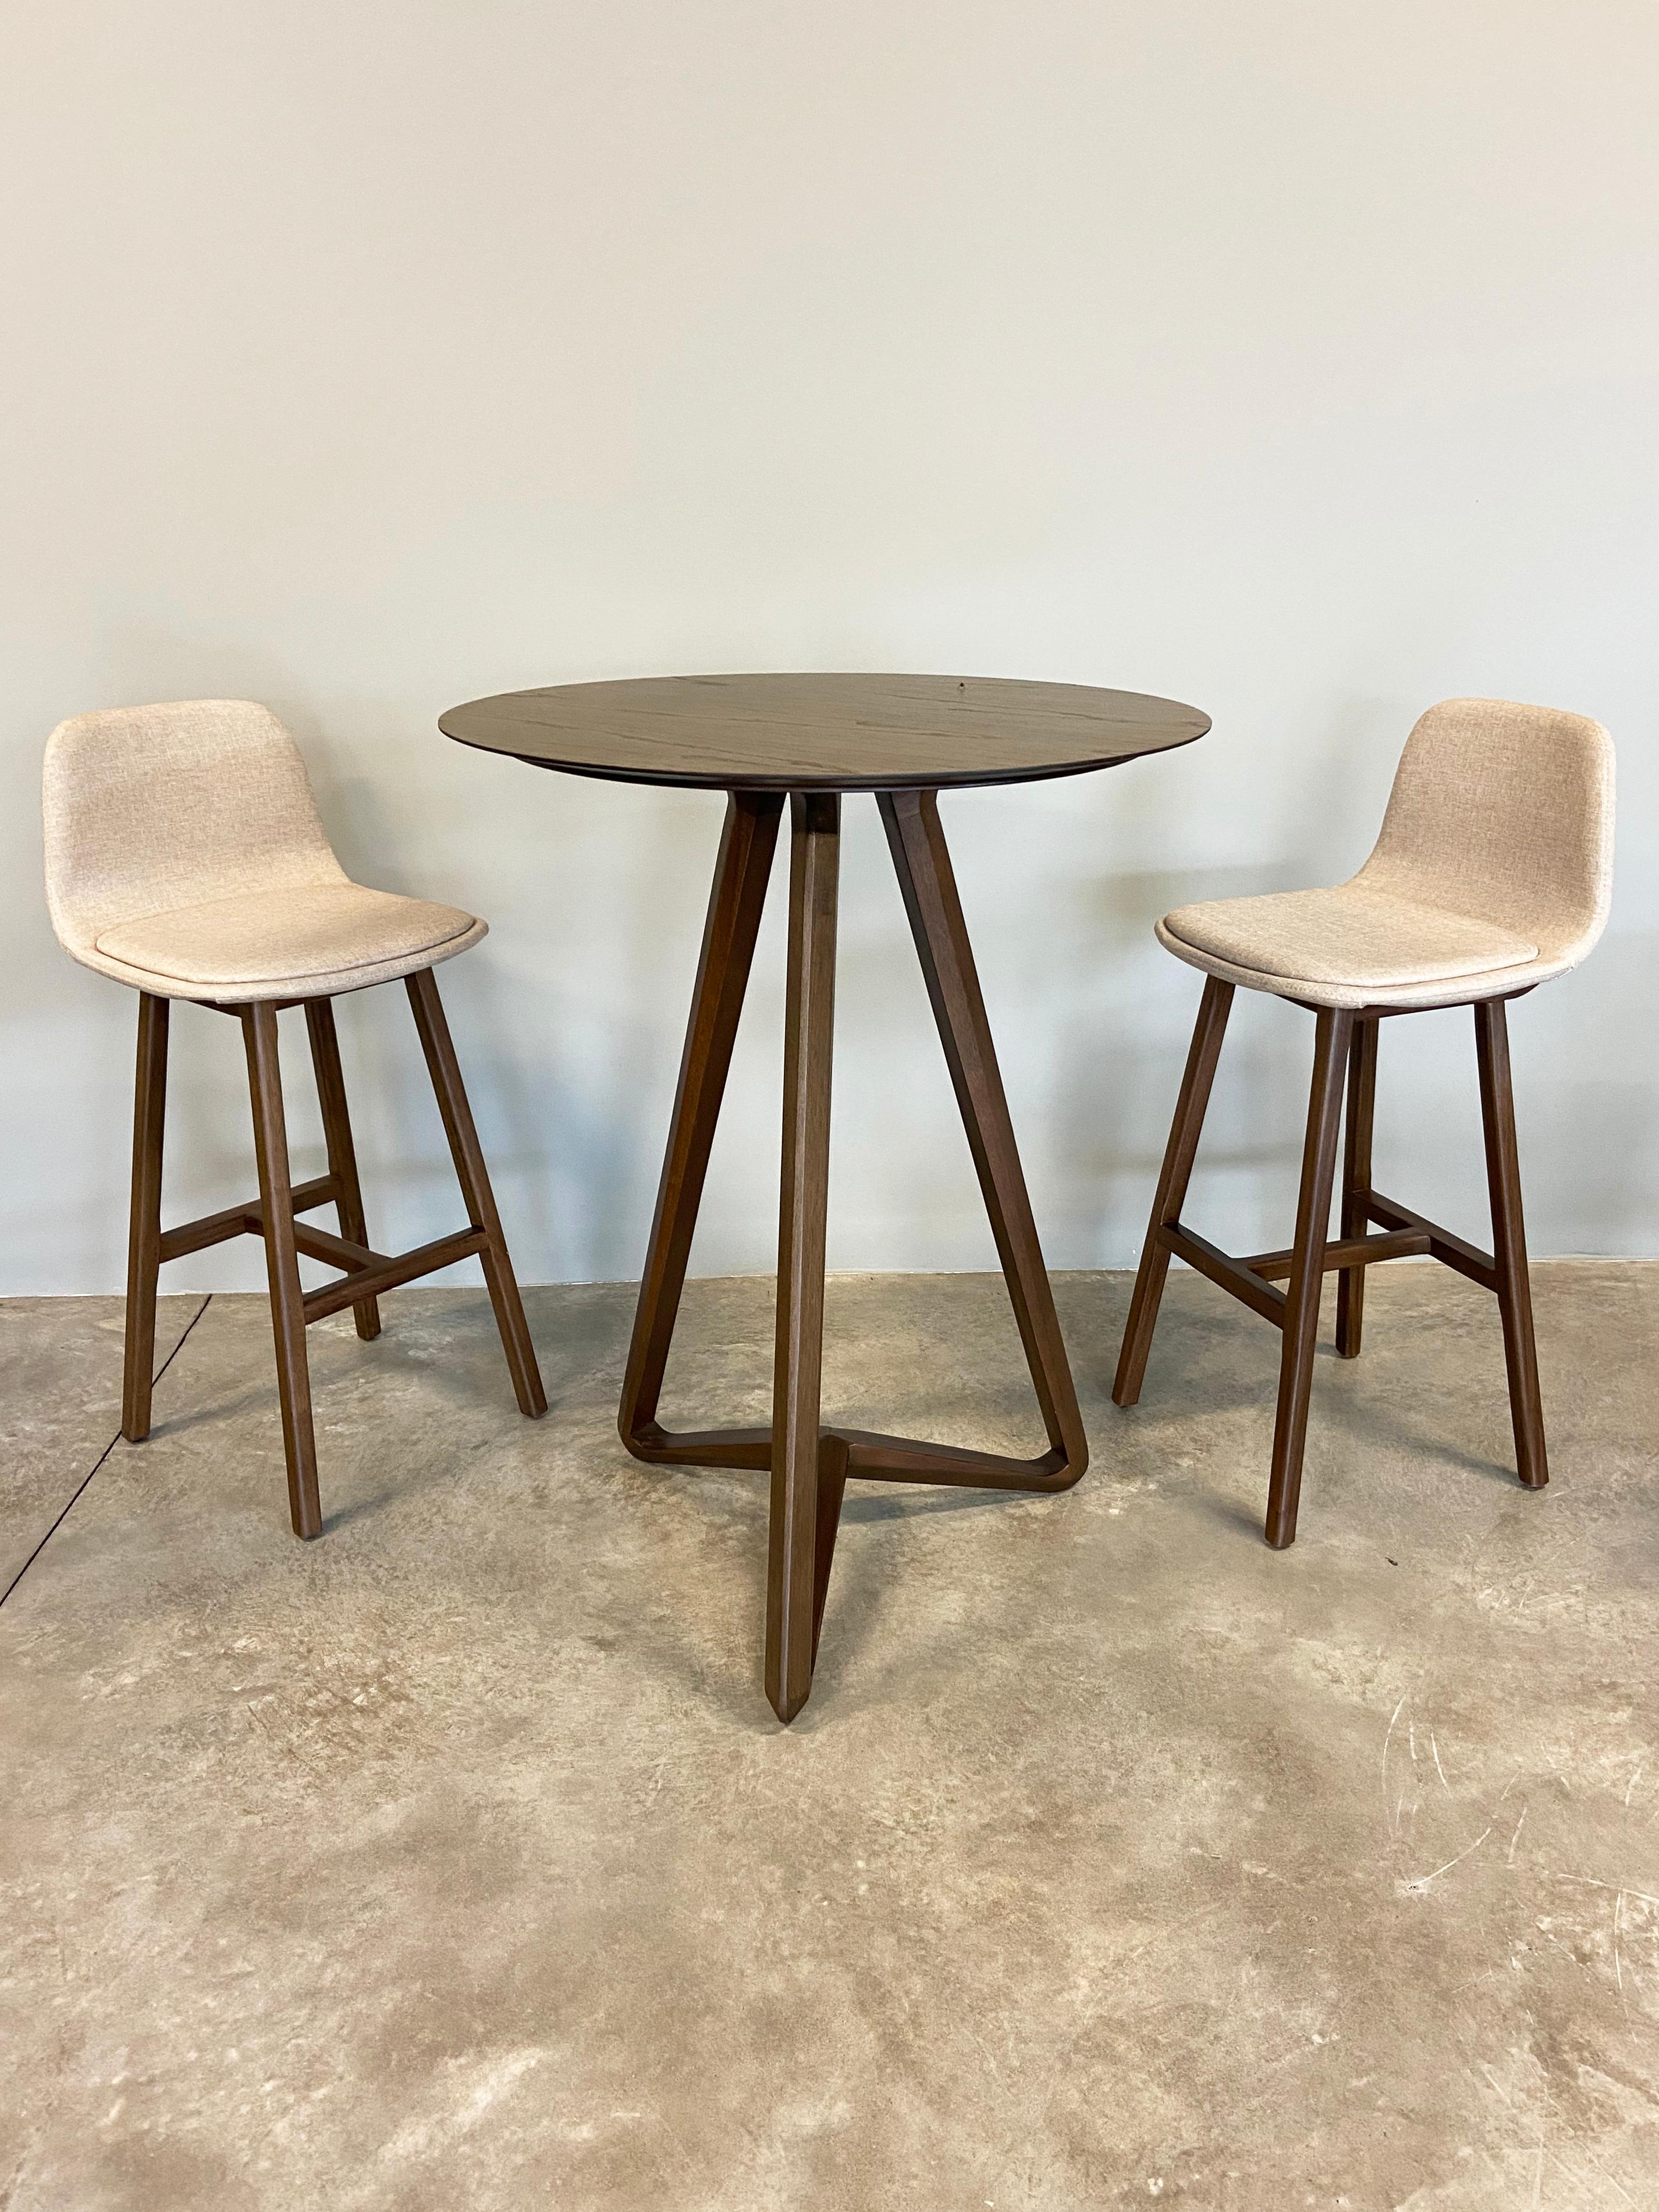 The Pub stool has a modern design that unites different angles to form a piece of attention and class.

Item Details:
Wood Structure: Nude
Fabric: Linen Light Cream 552

NOTE: THE IMAGES ARE ILLUSTRATIVE, THE FINISHES ARE IN THE LAST PHOTO.
COLORS